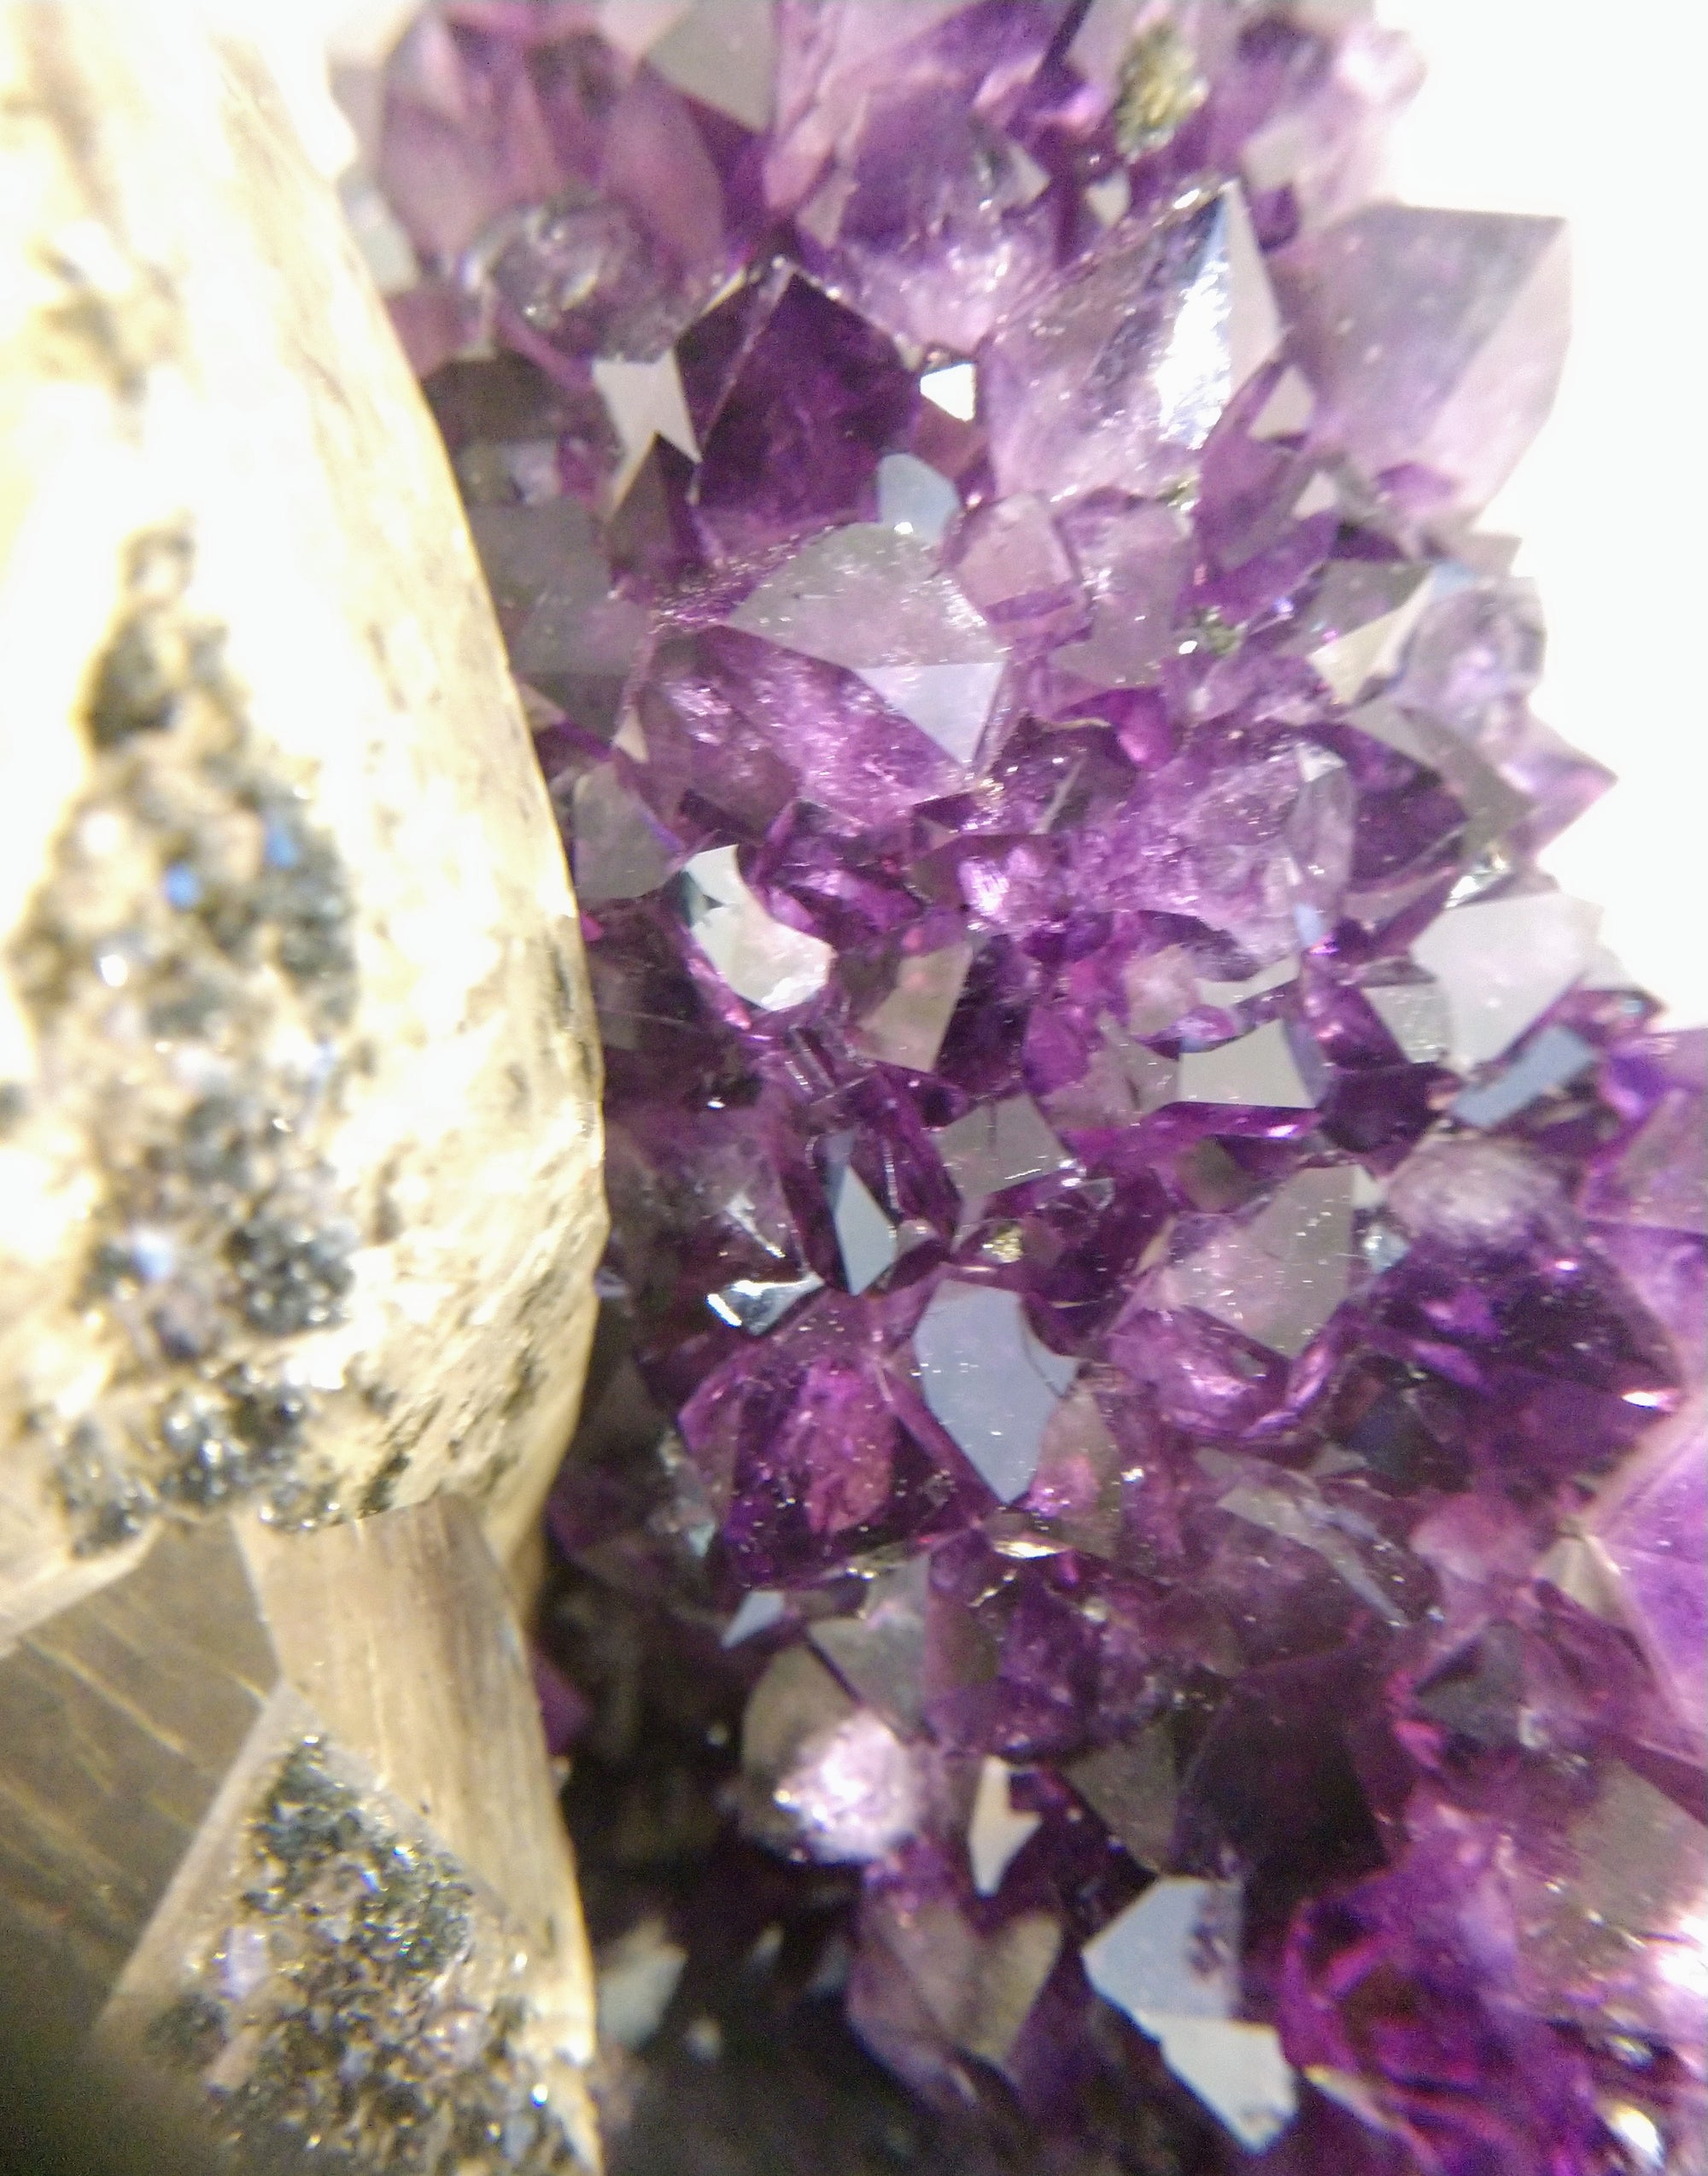 Amethyst with Calcite from Uruguay